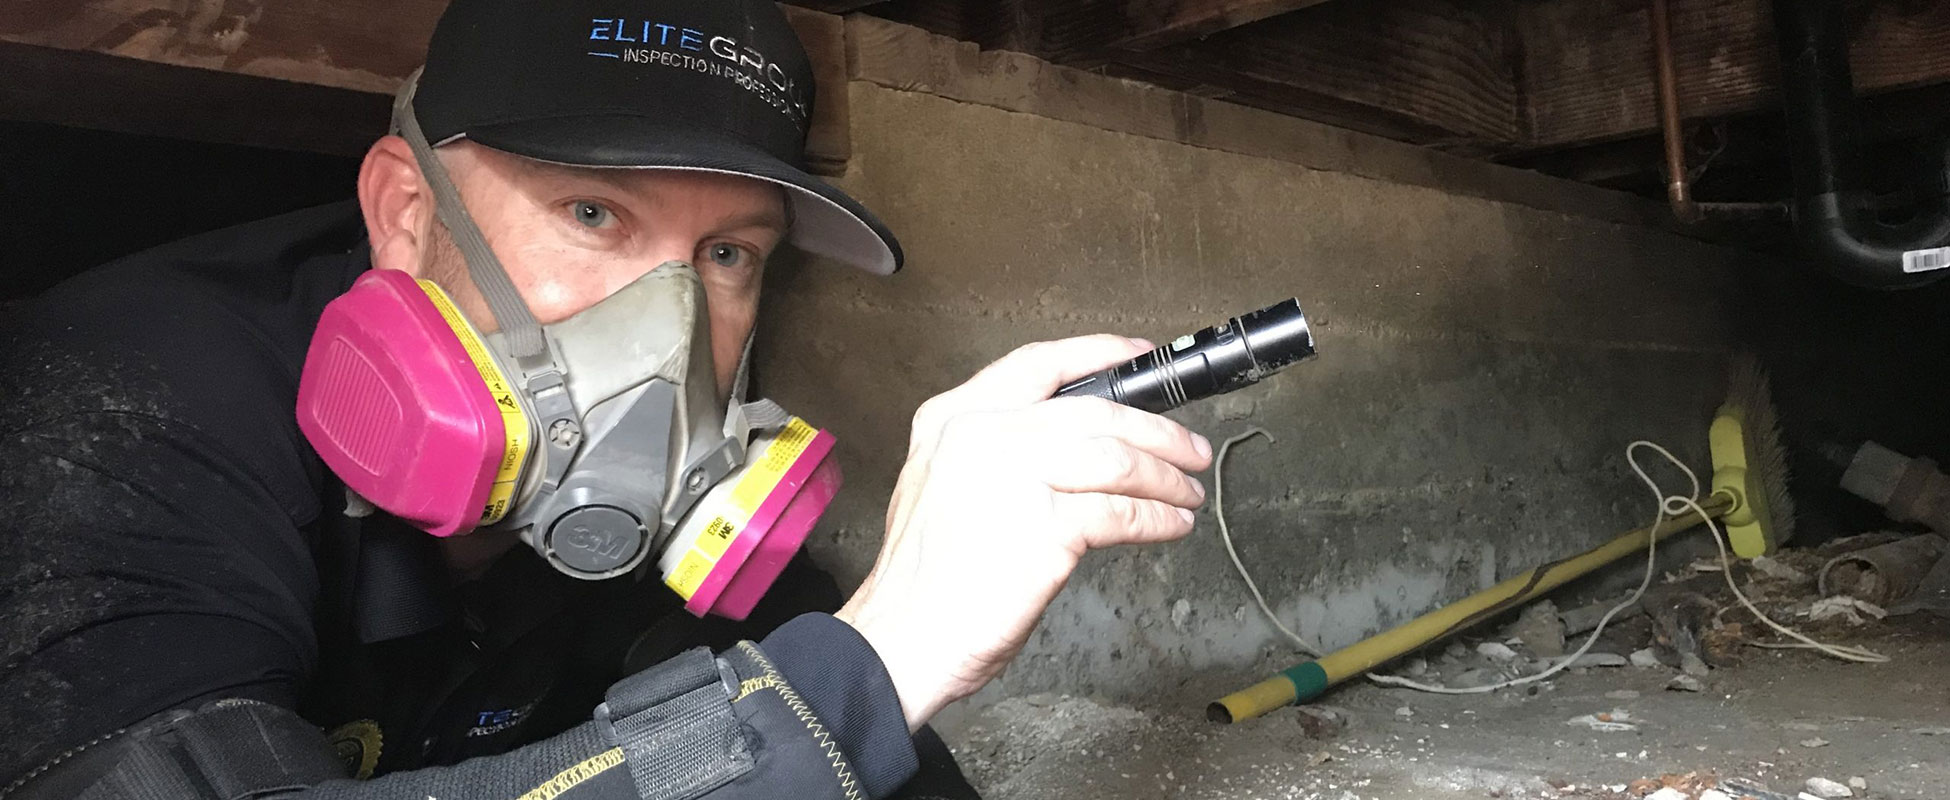 Elite Group inspector performing crawl space inspection